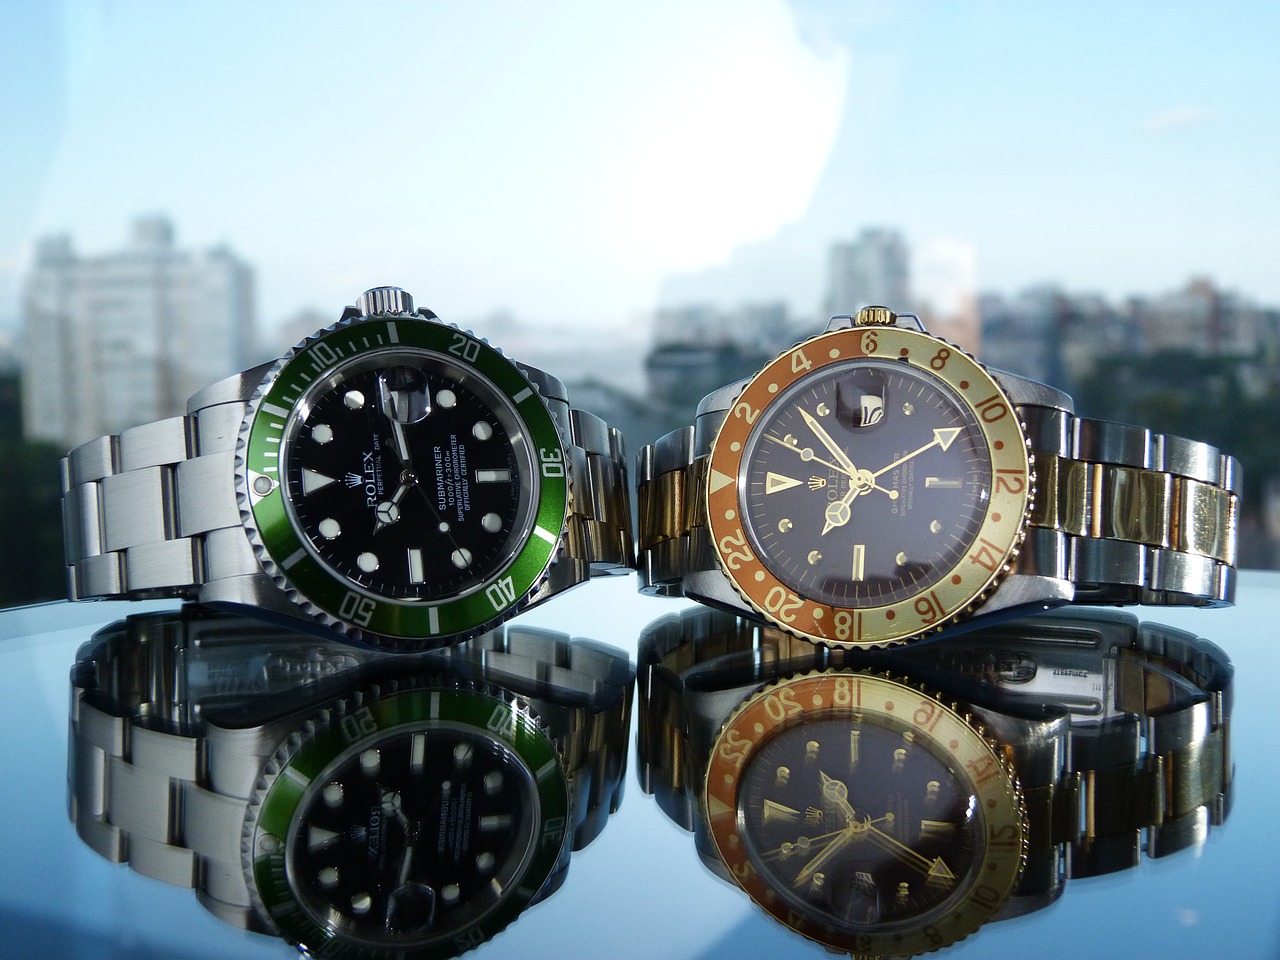  Does the Rolex need saving by 3D print technology? 